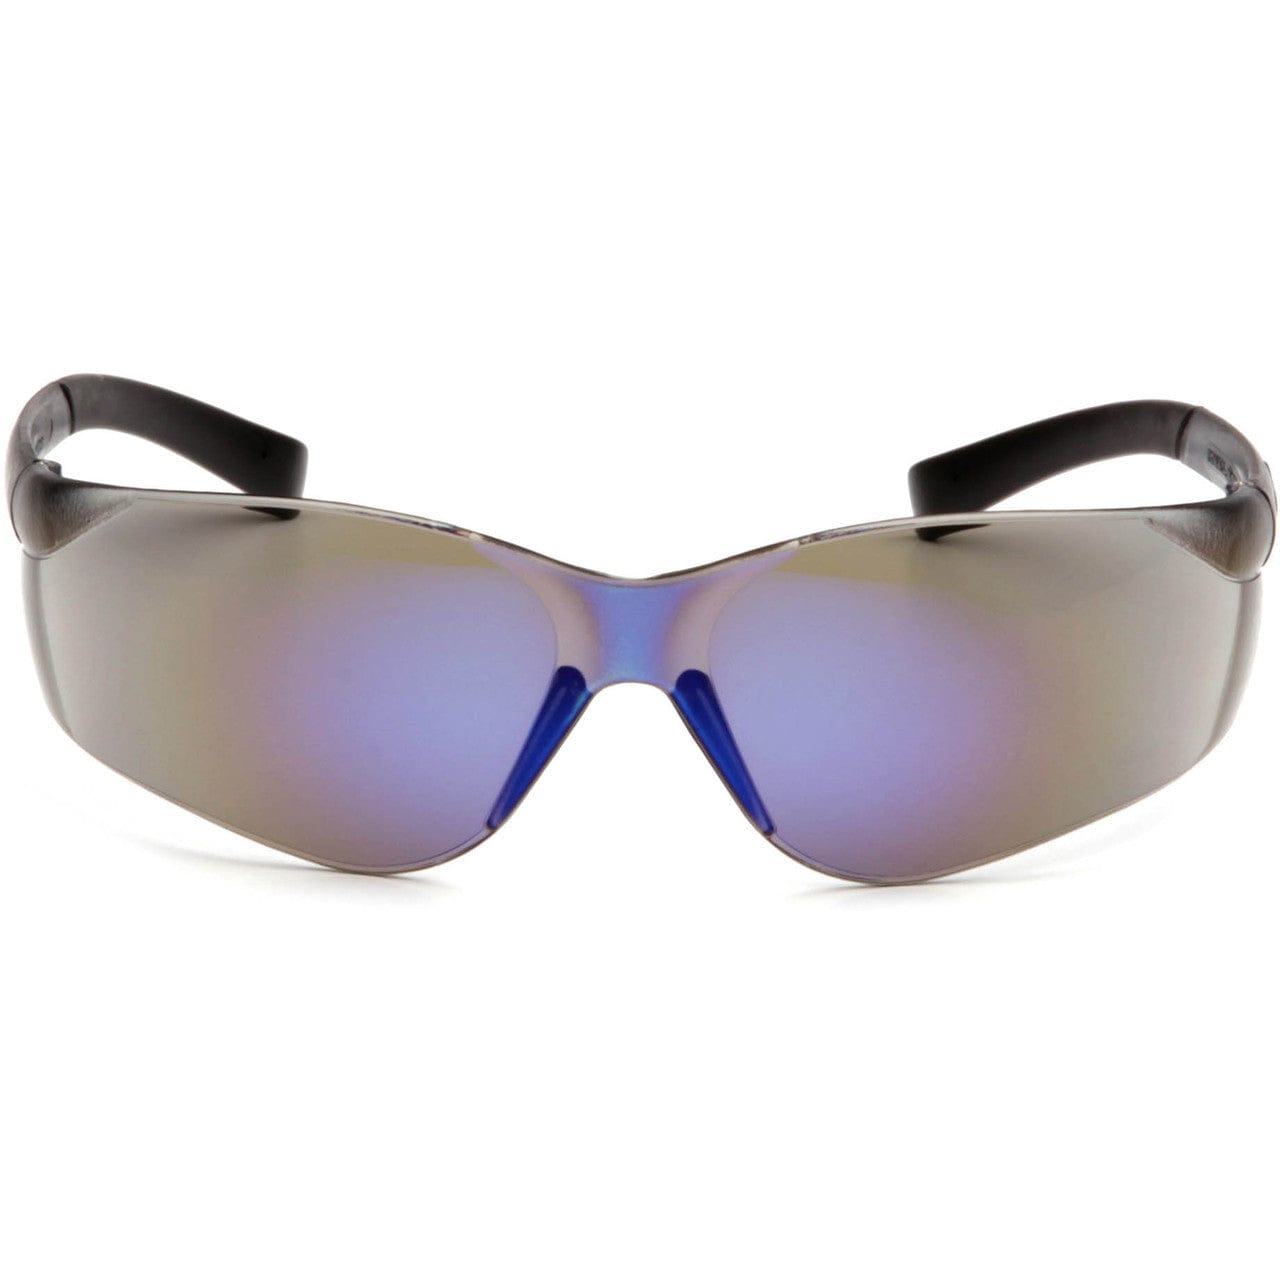 Pyramex Ztek Safety Glasses with Blue Mirror Lens S2575S Front View